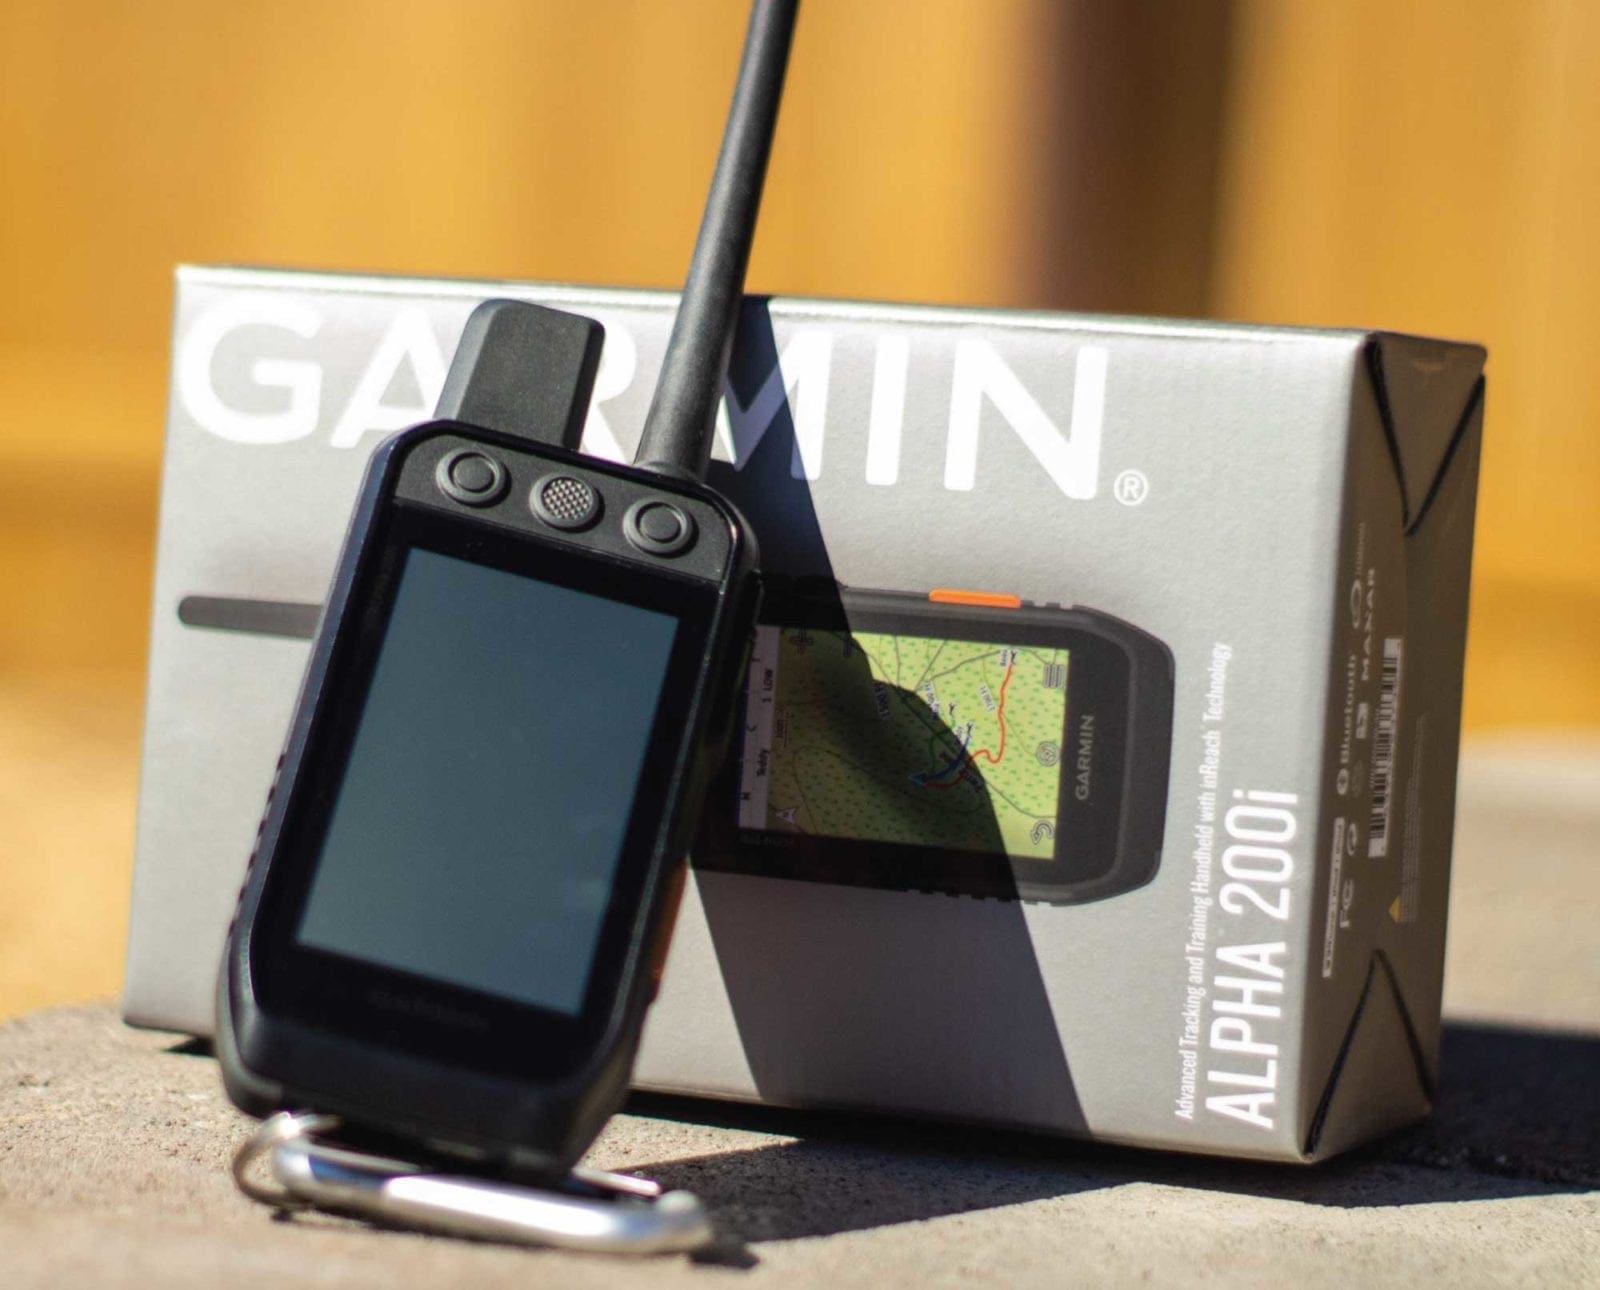 An unboxing of the Garmin Alpha 200i